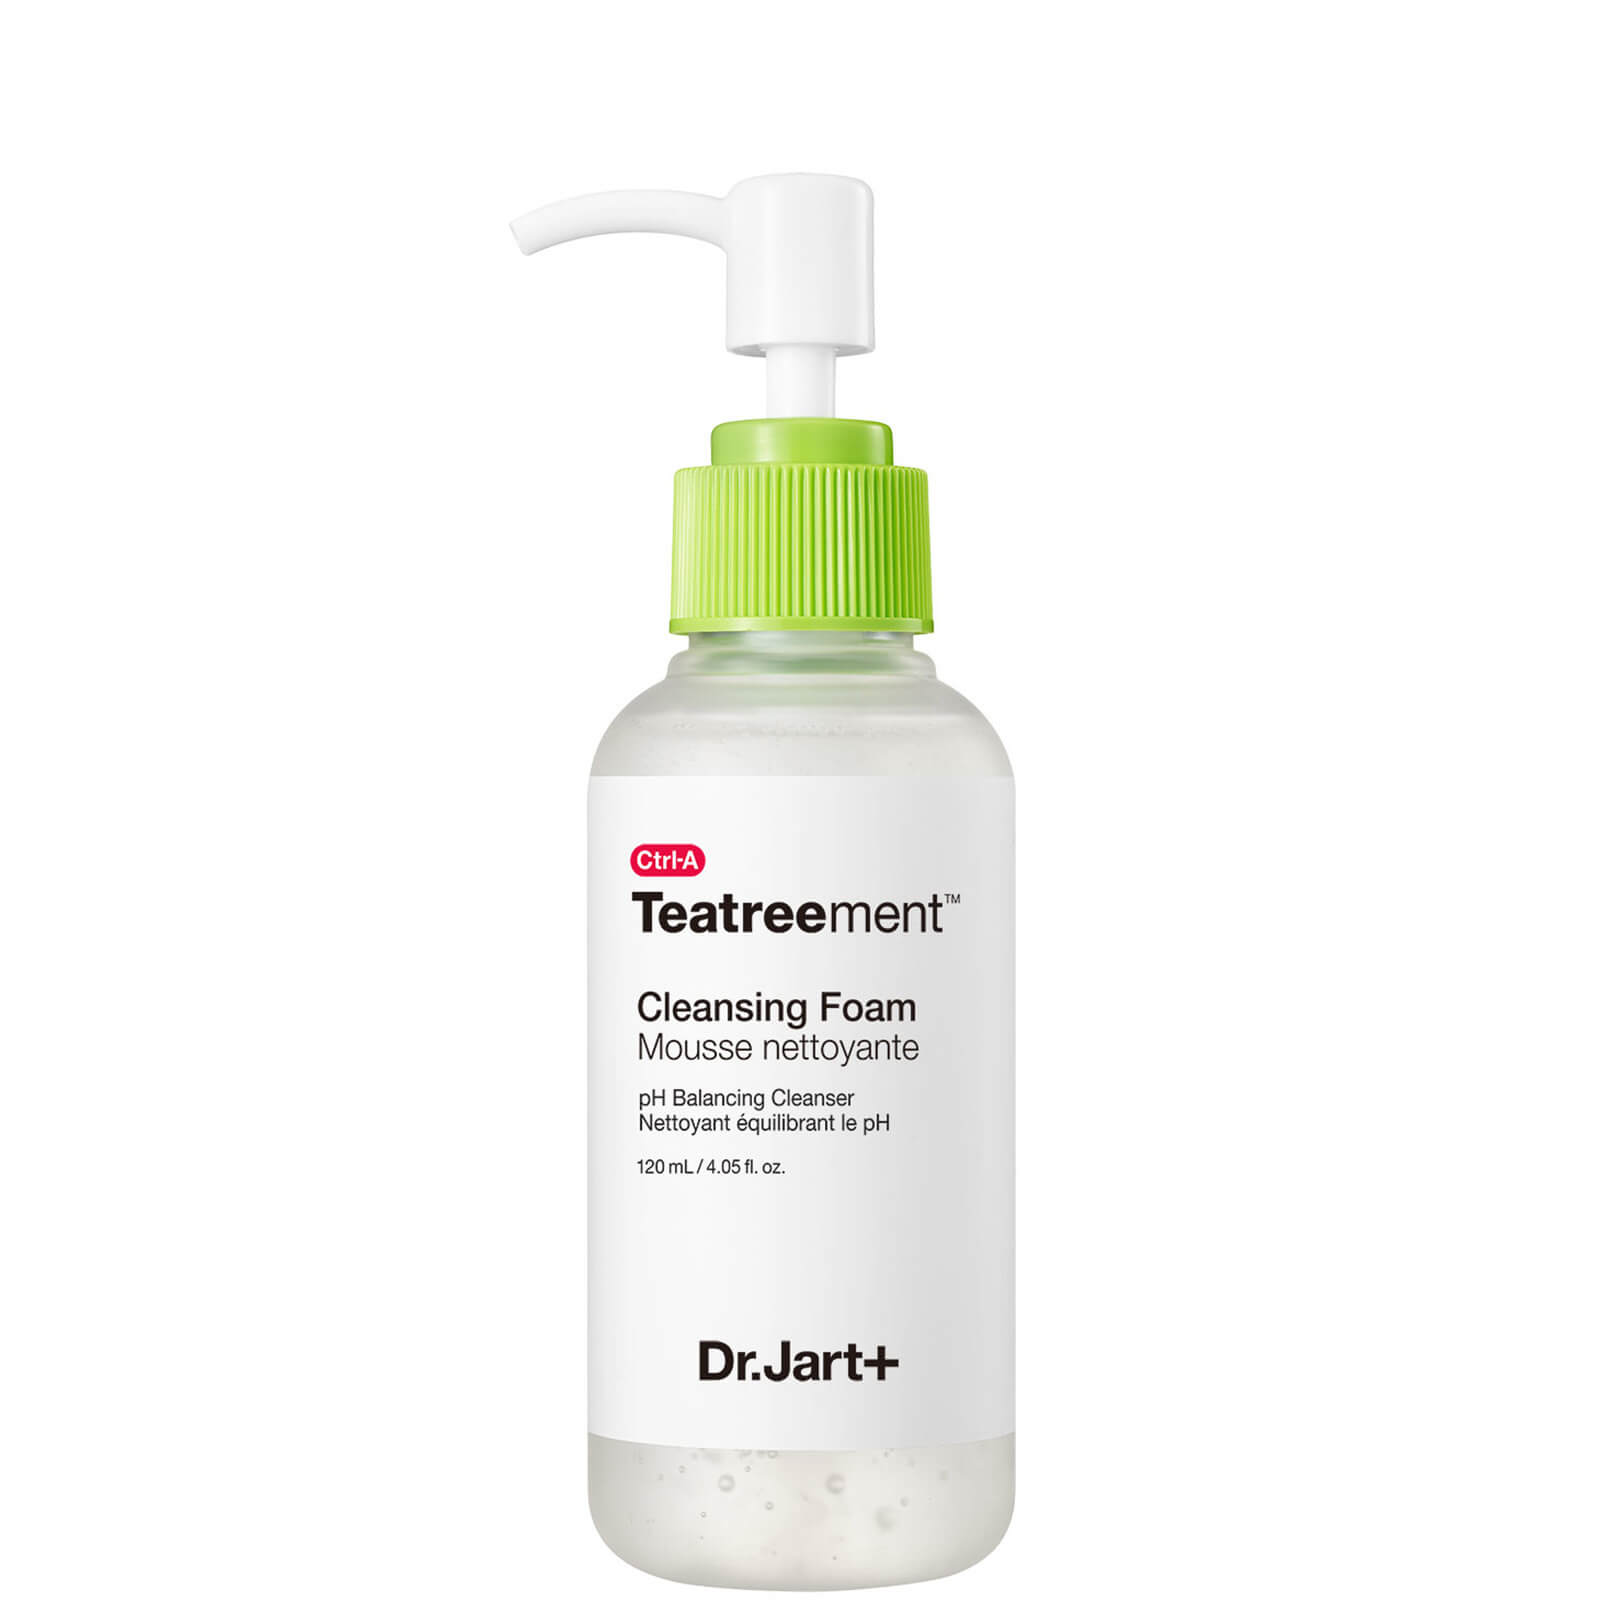 Photos - Facial / Body Cleansing Product Dr. JartPlus Dr.Jart+ Teatreement Cleansing Foam 120ml 